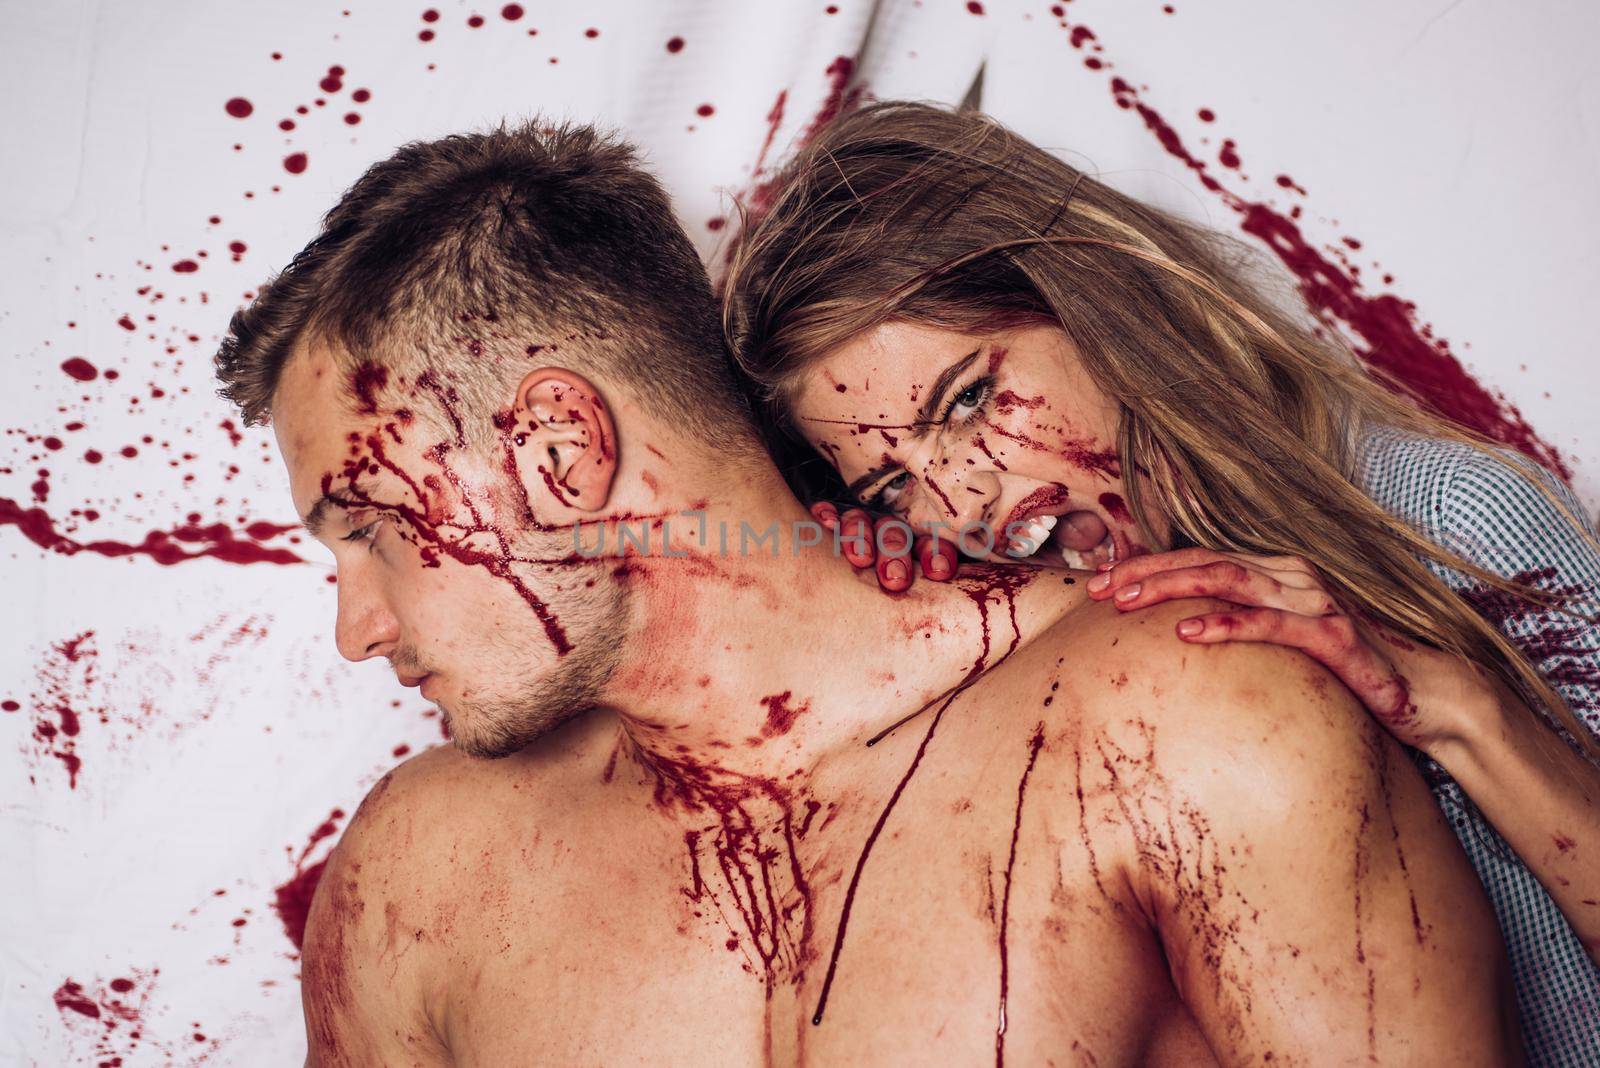 Bloody halloween couple in love. Together. Strong man wearing butcher apron with blood stains. Happy Halloween